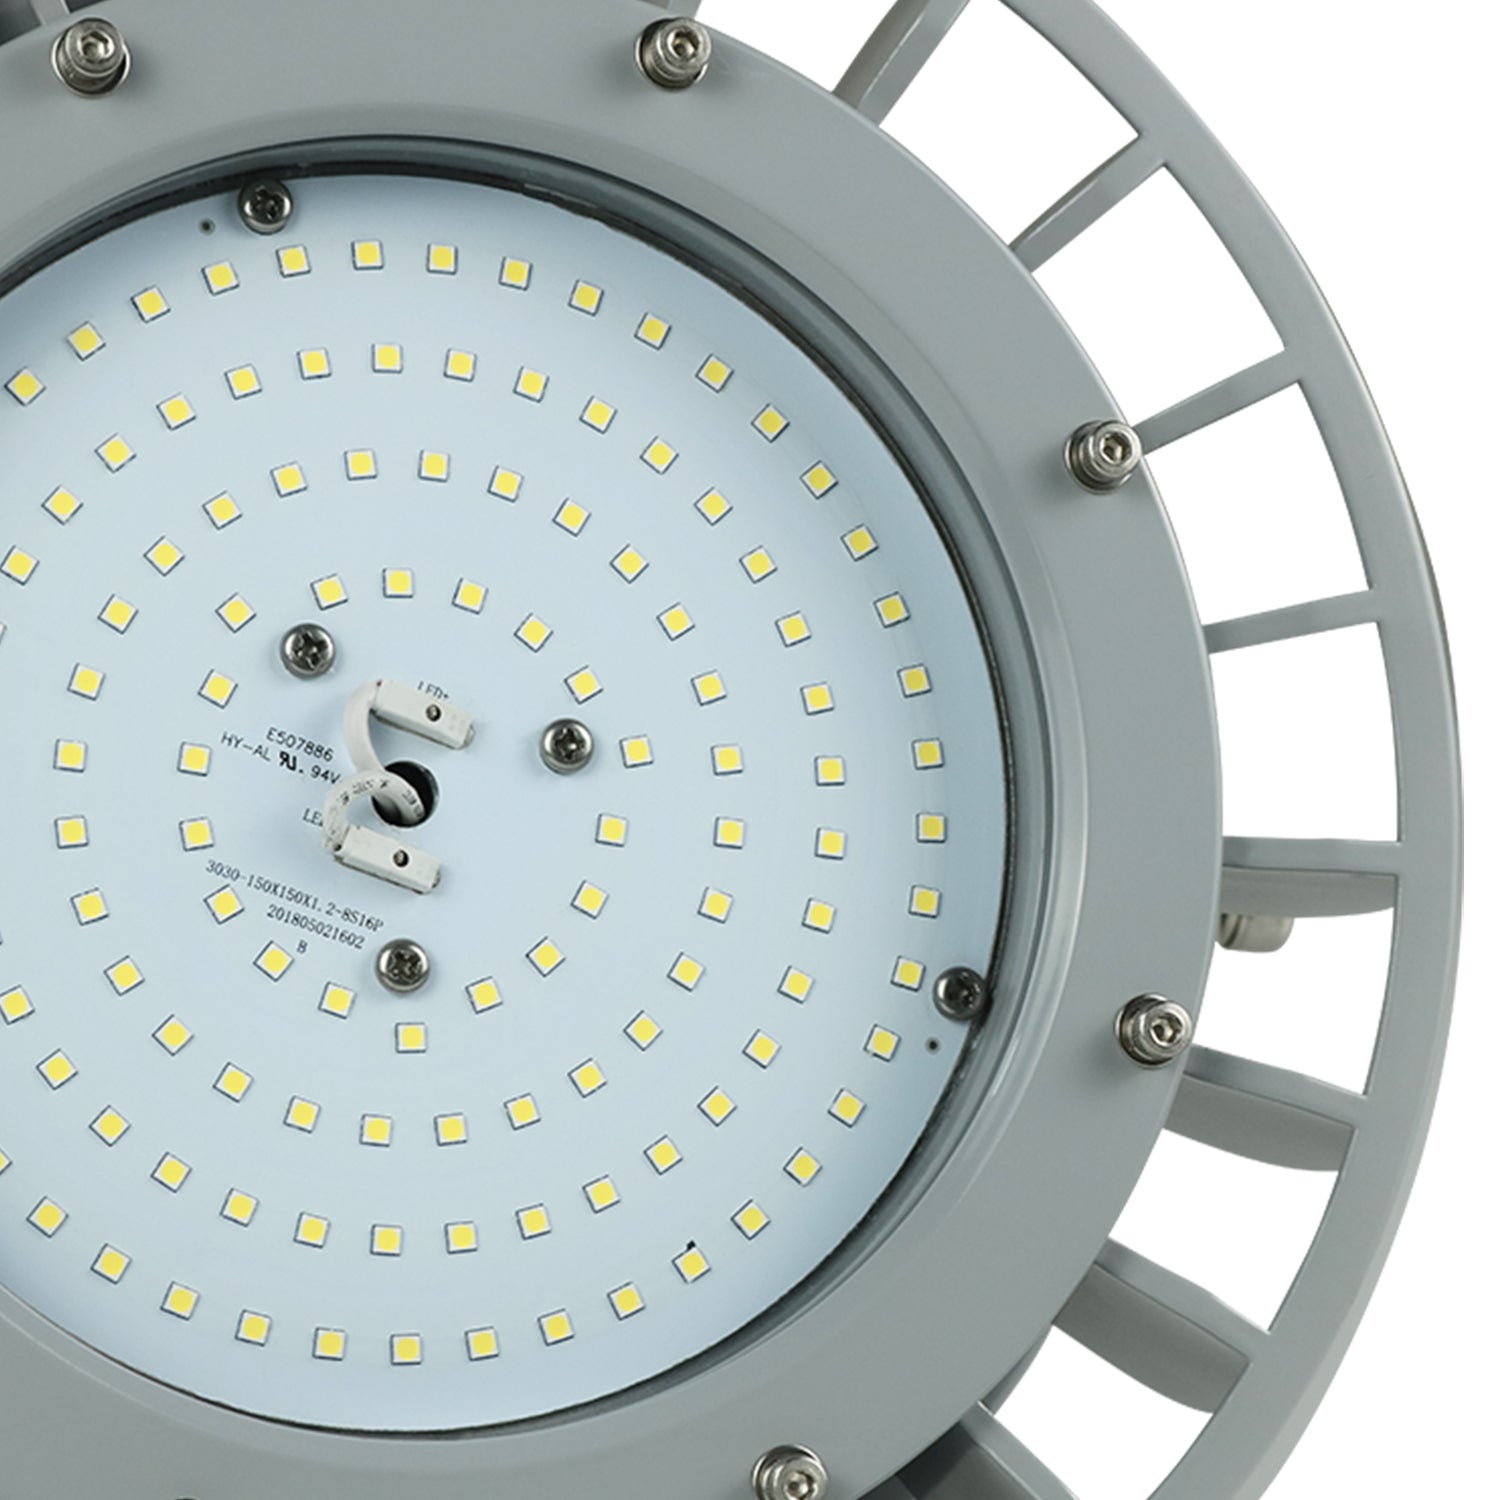 B Series 200W Dimmable LED Explosion Proof Round High Bay Light - 5000K, 27000LM, IP66 Rated for Hazardous Locations